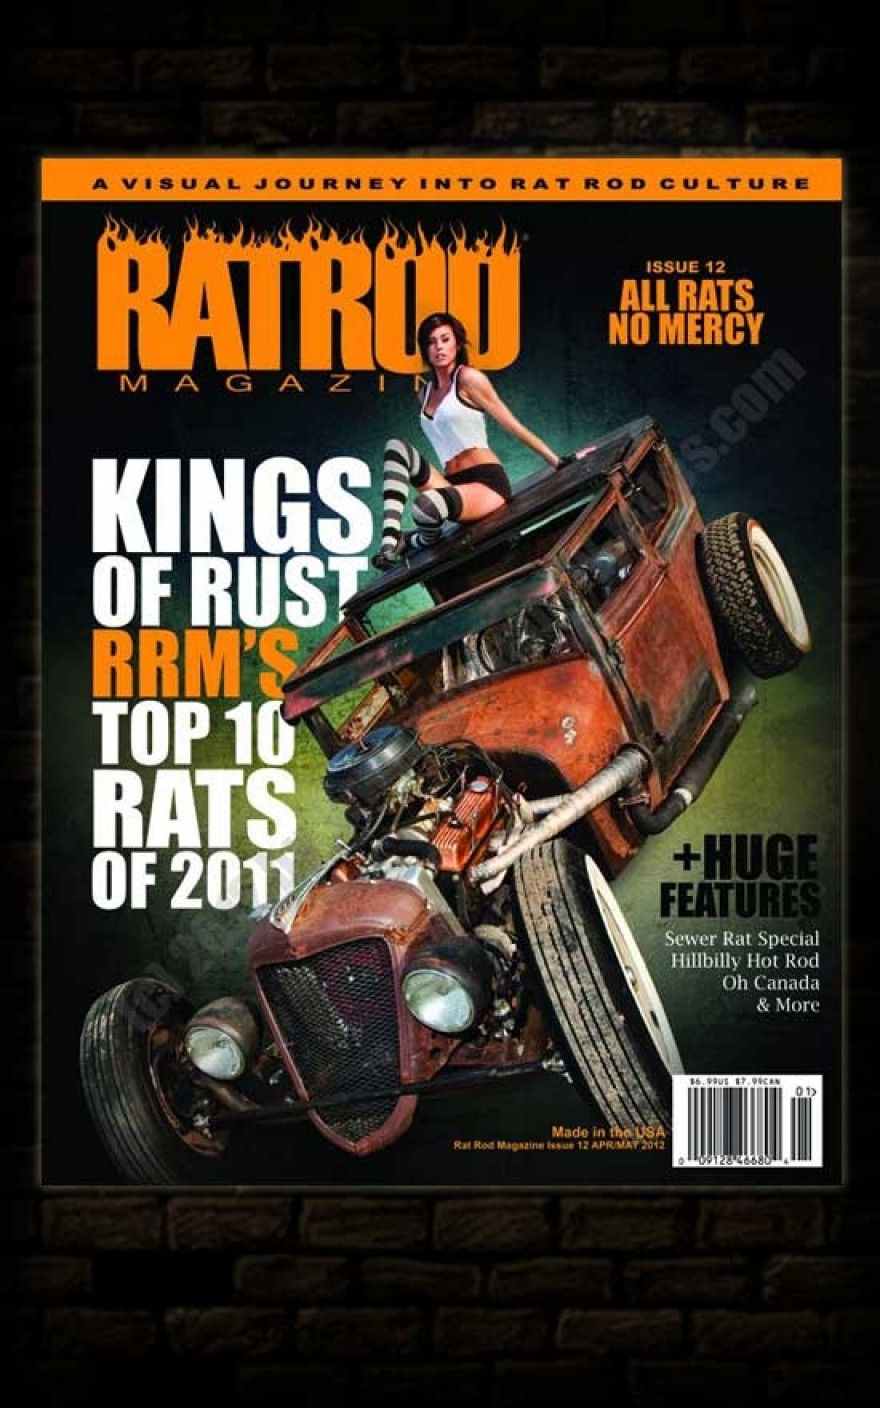 Mix in our Best of 2011 awards and you've got pure Rat Rod Magazine mayhem